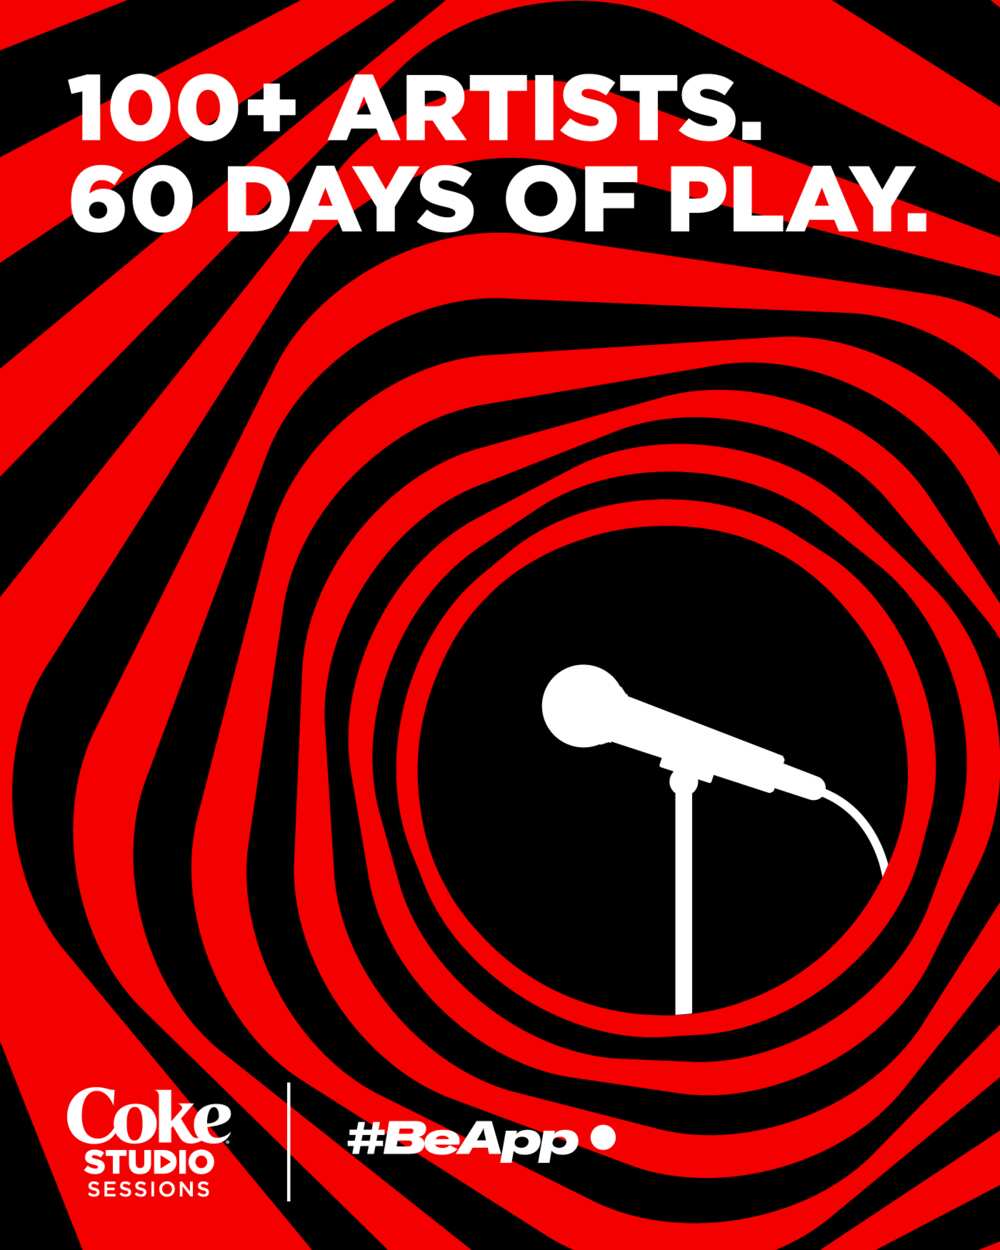 BeApp partners with Coca-Cola to launch Coke Studio sessions